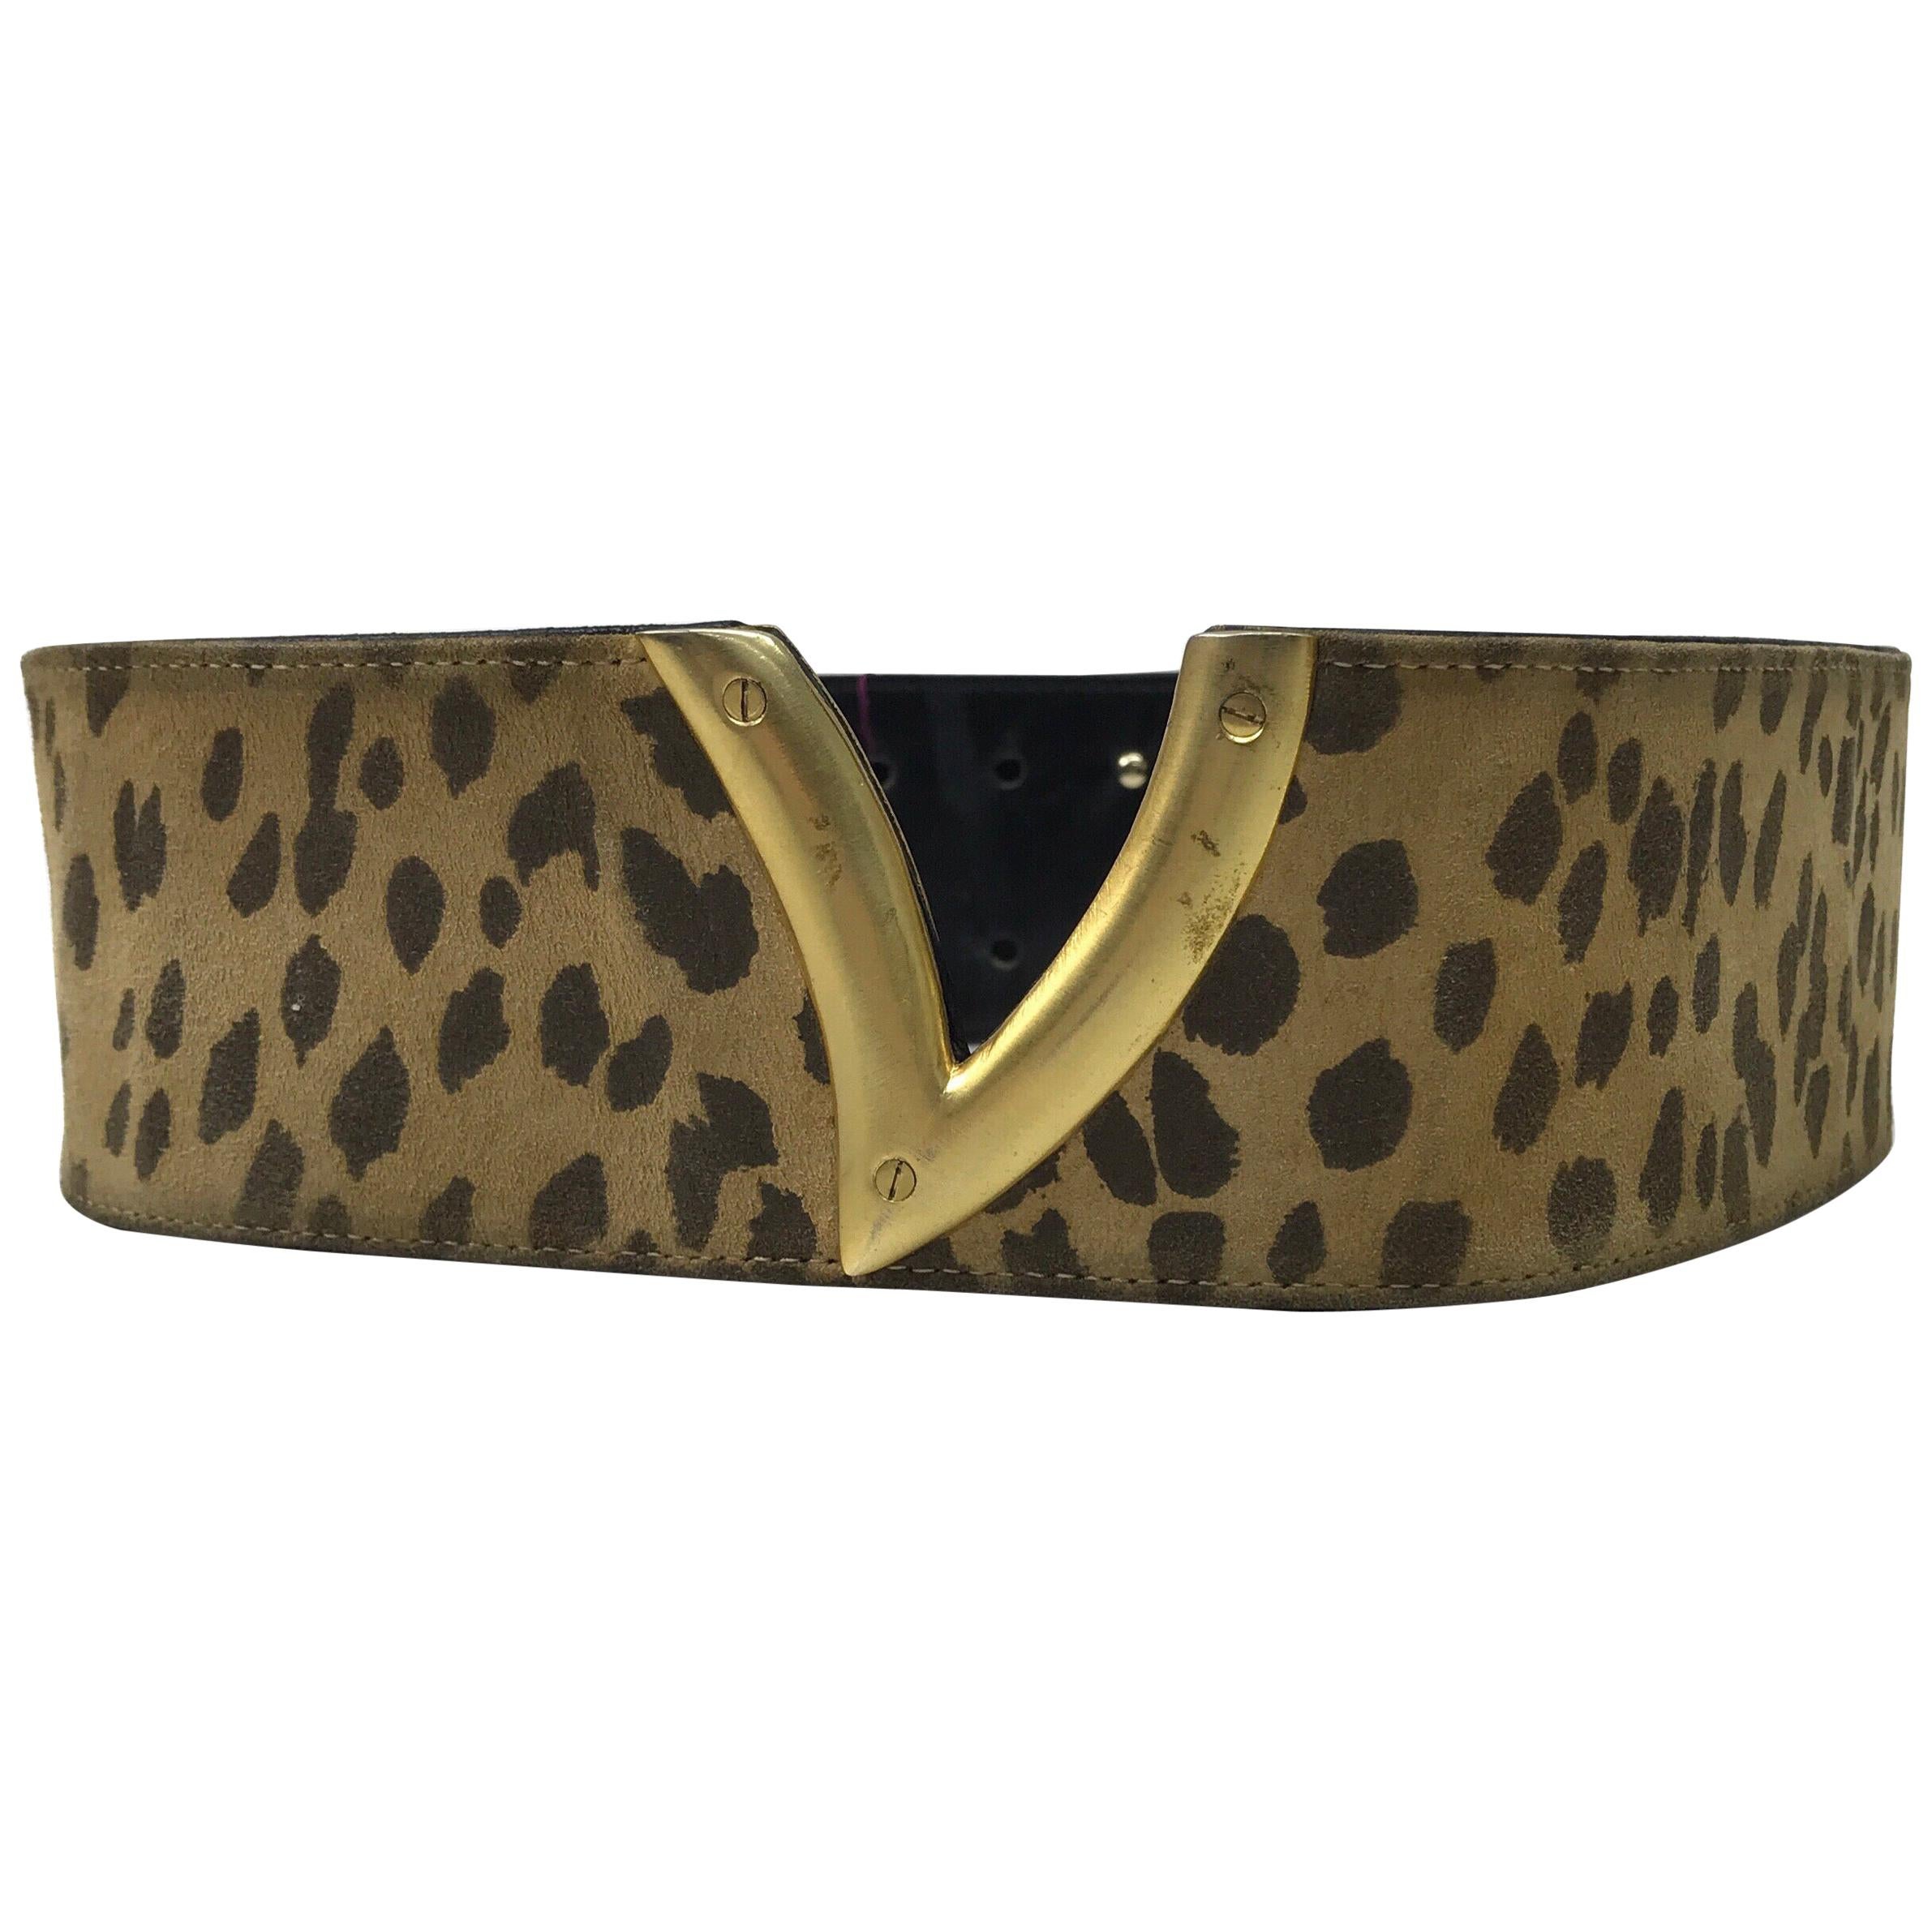 Valentino Couture Reversible Cheetah & Black Leather Belt with Gold Front "V"